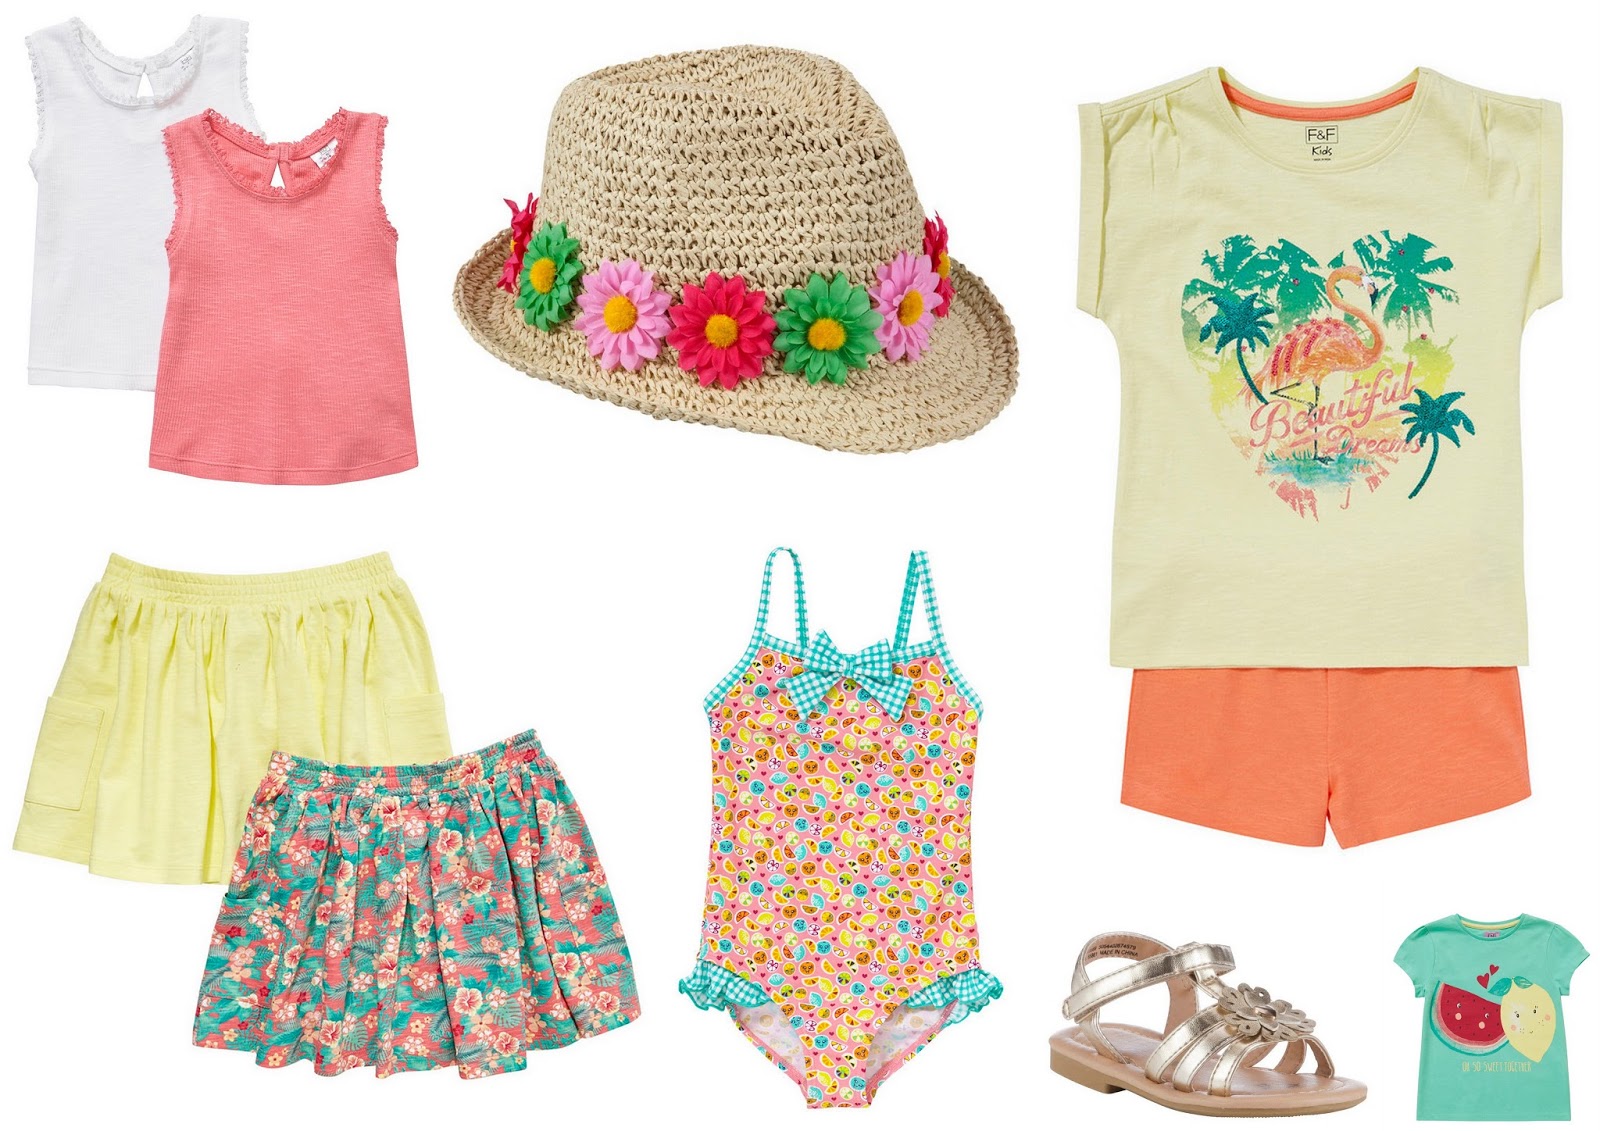 Fantastic Summer Fashion for Kids from F&F The Sandpit